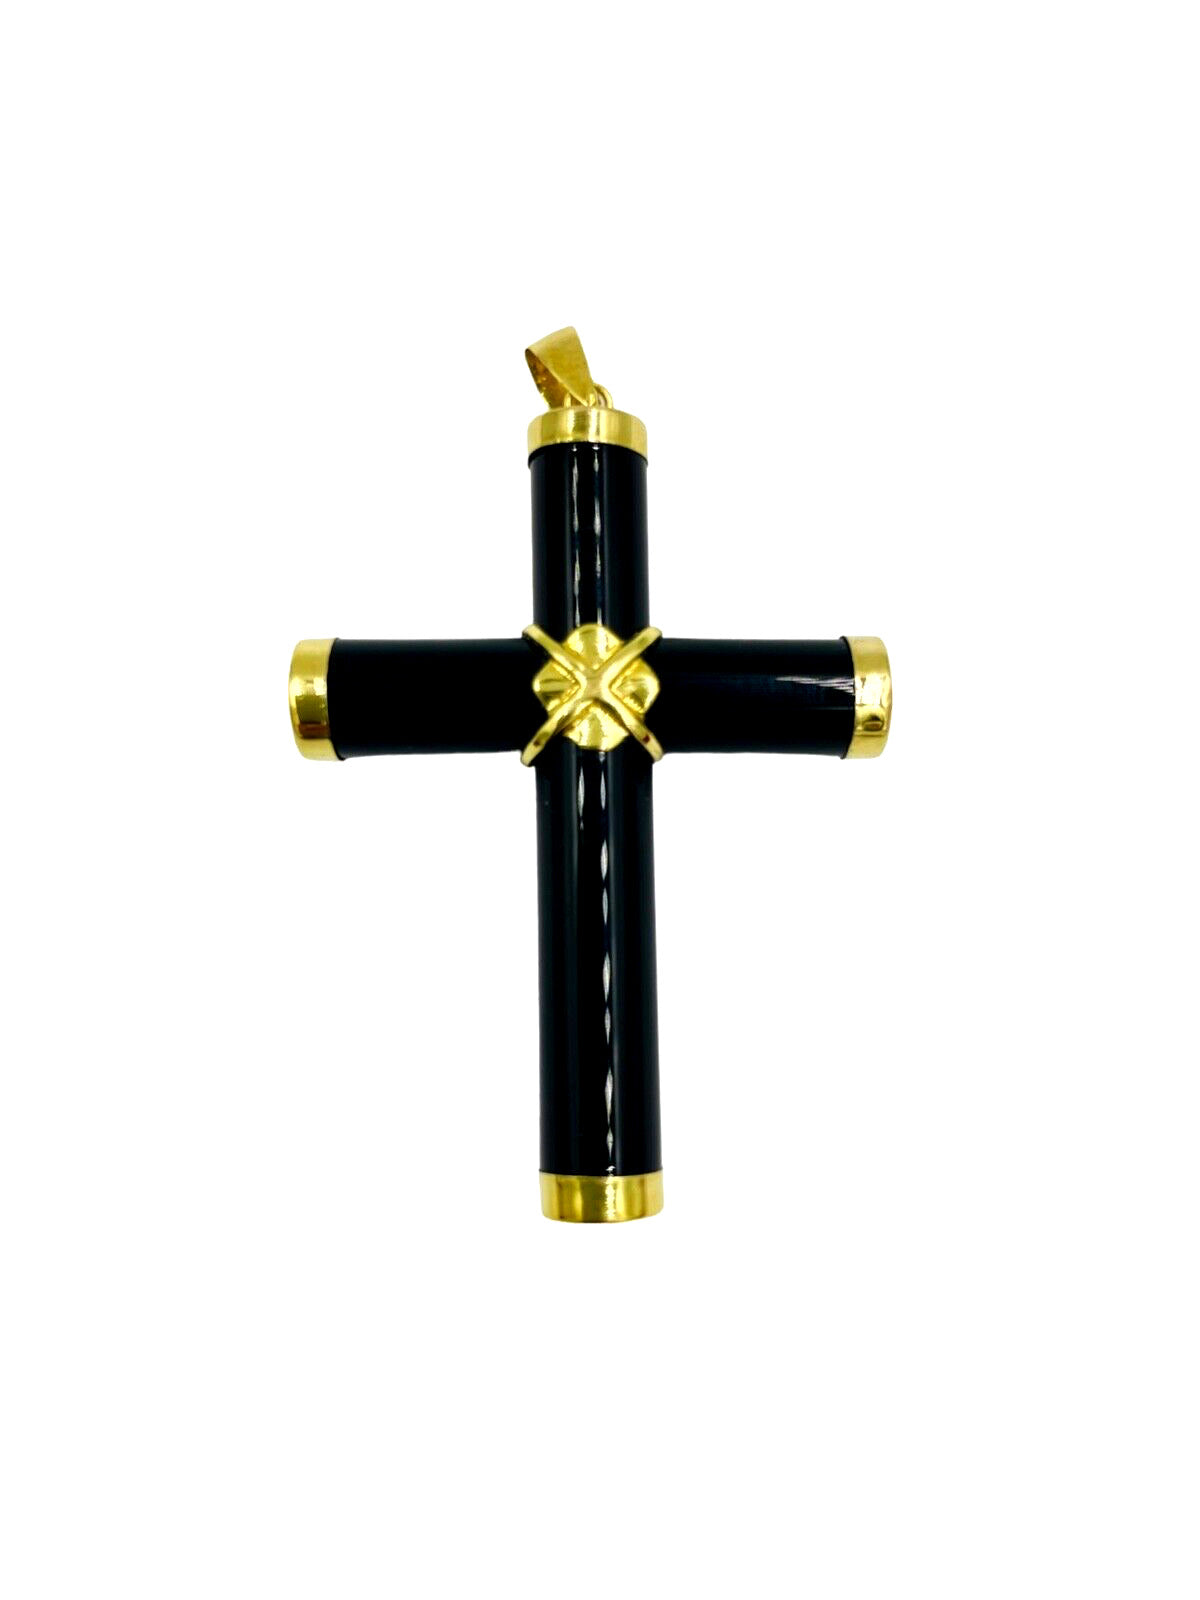 Vintage 14k yellow Gold Onyx flower Cross pendant double sided